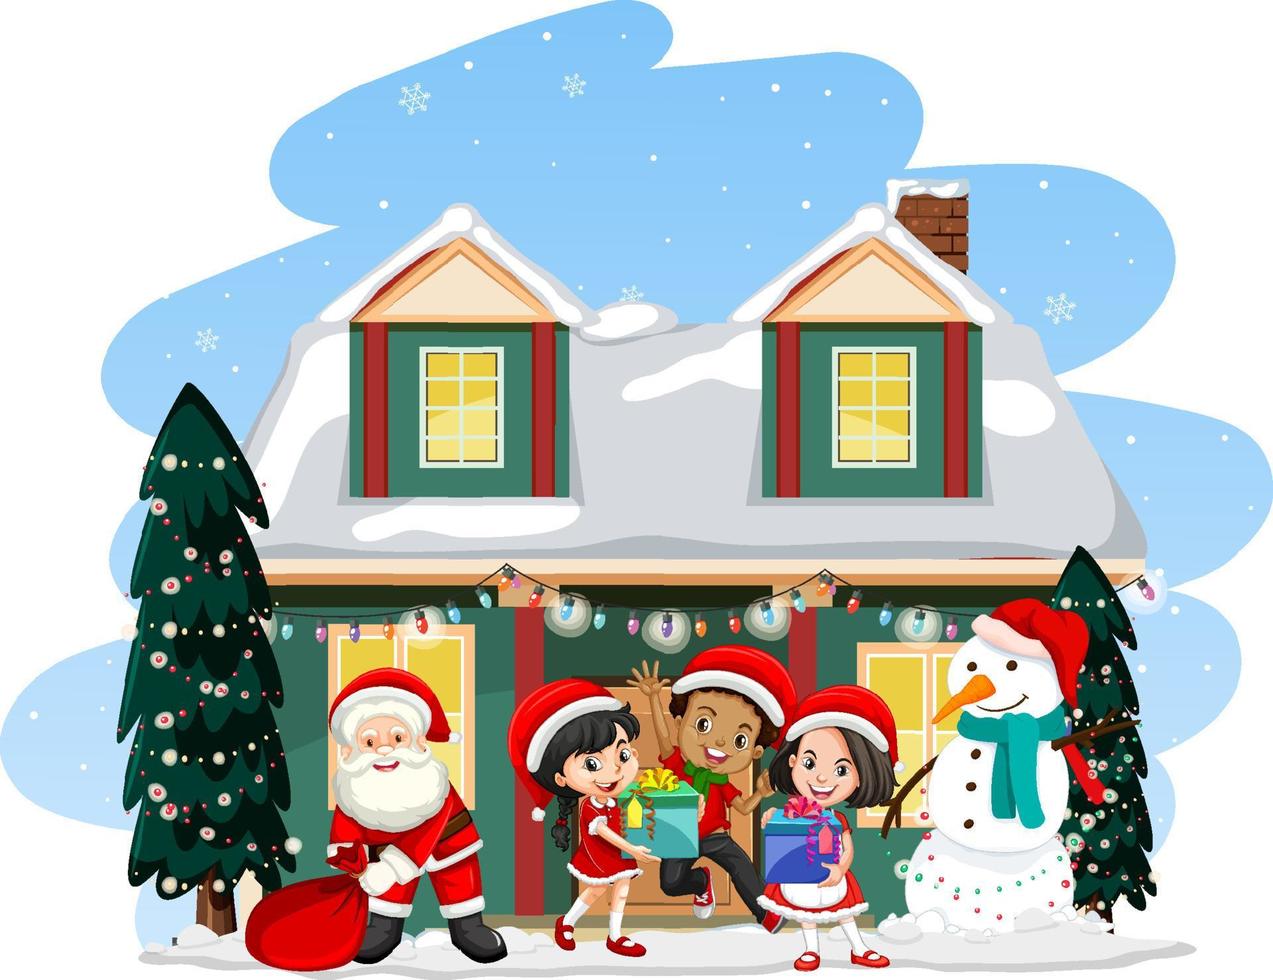 Santa Claus with children standing in front a house vector